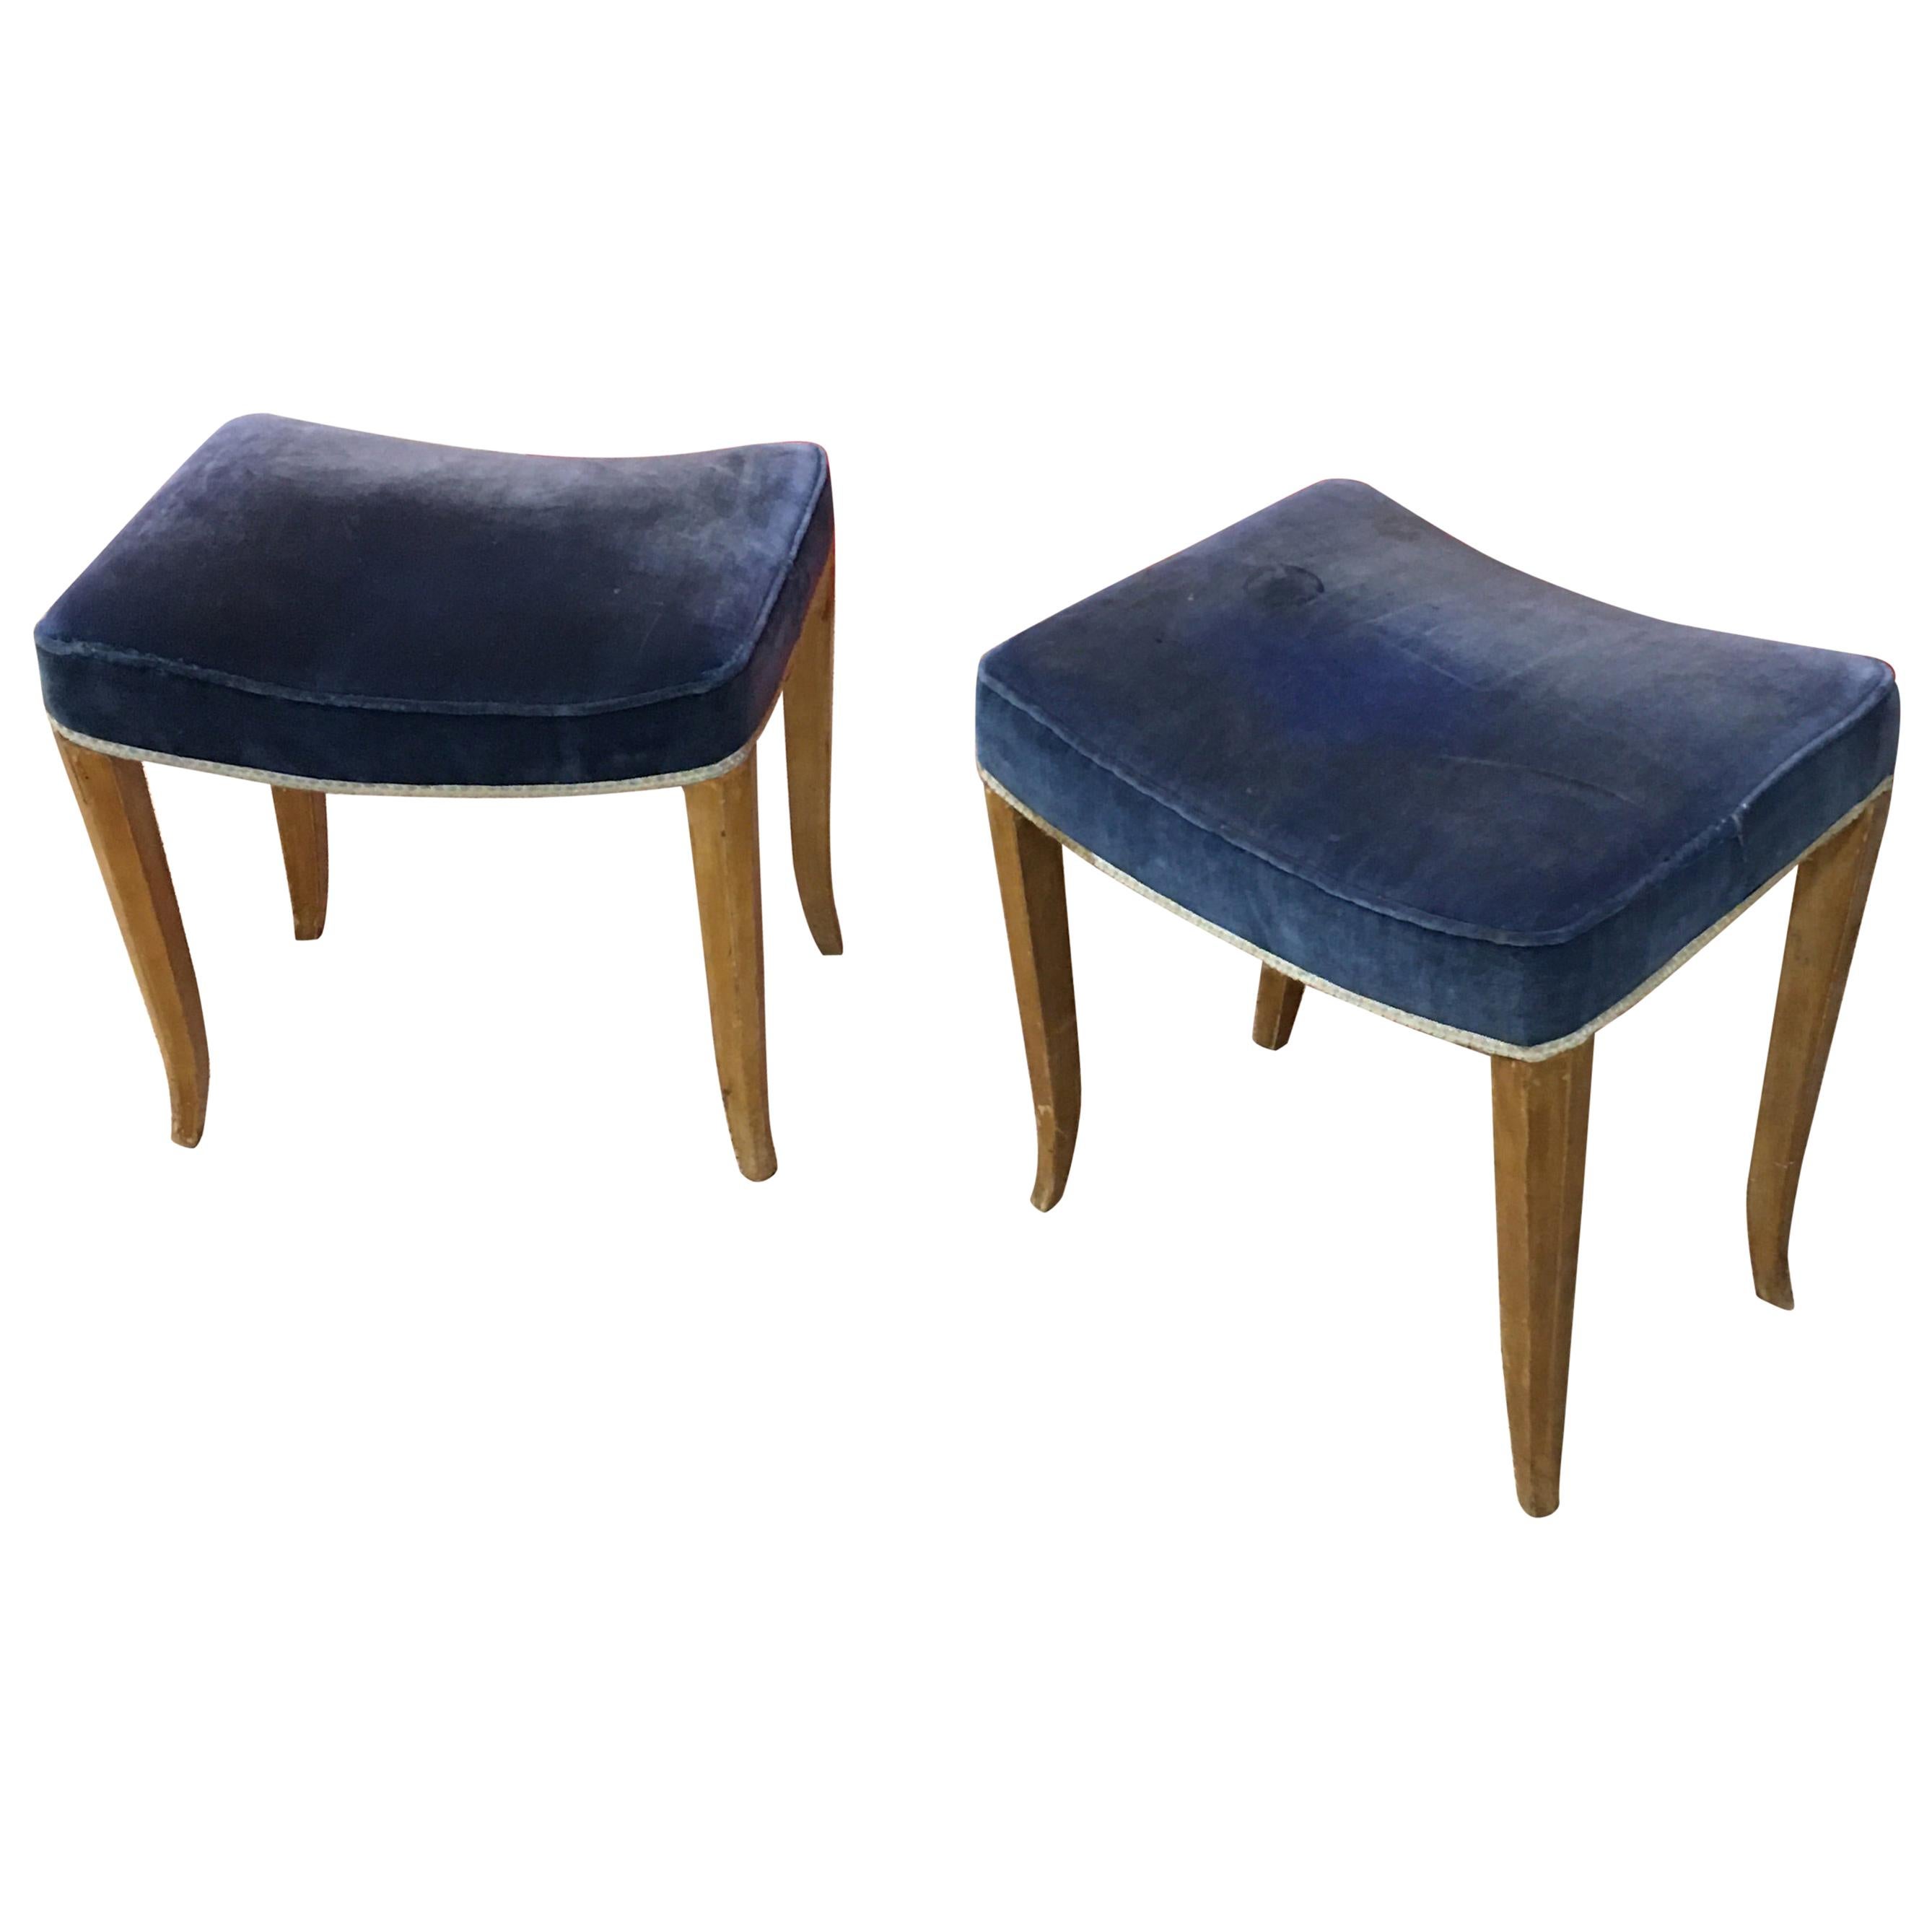 René Prou, 2 Art Deco Stools in Lacquered Wood and Blue Velvet, circa 1940-1950 For Sale